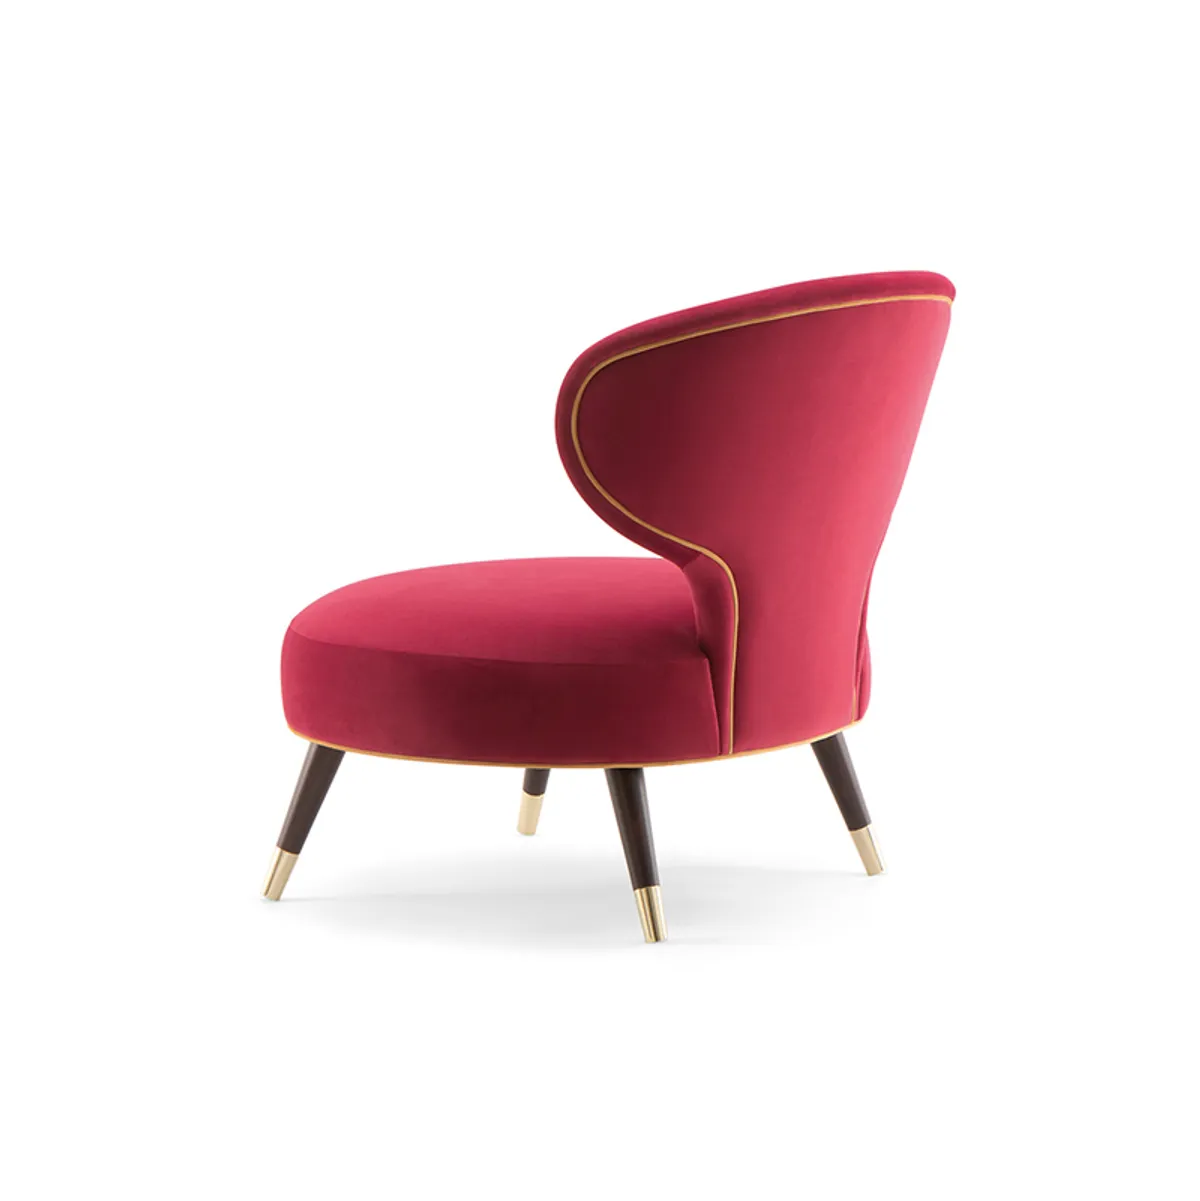 Sylvia Lounge Chair Pink Studded Upholstery And Wooden Legs Hotel Furniture By Insideoutcontracts